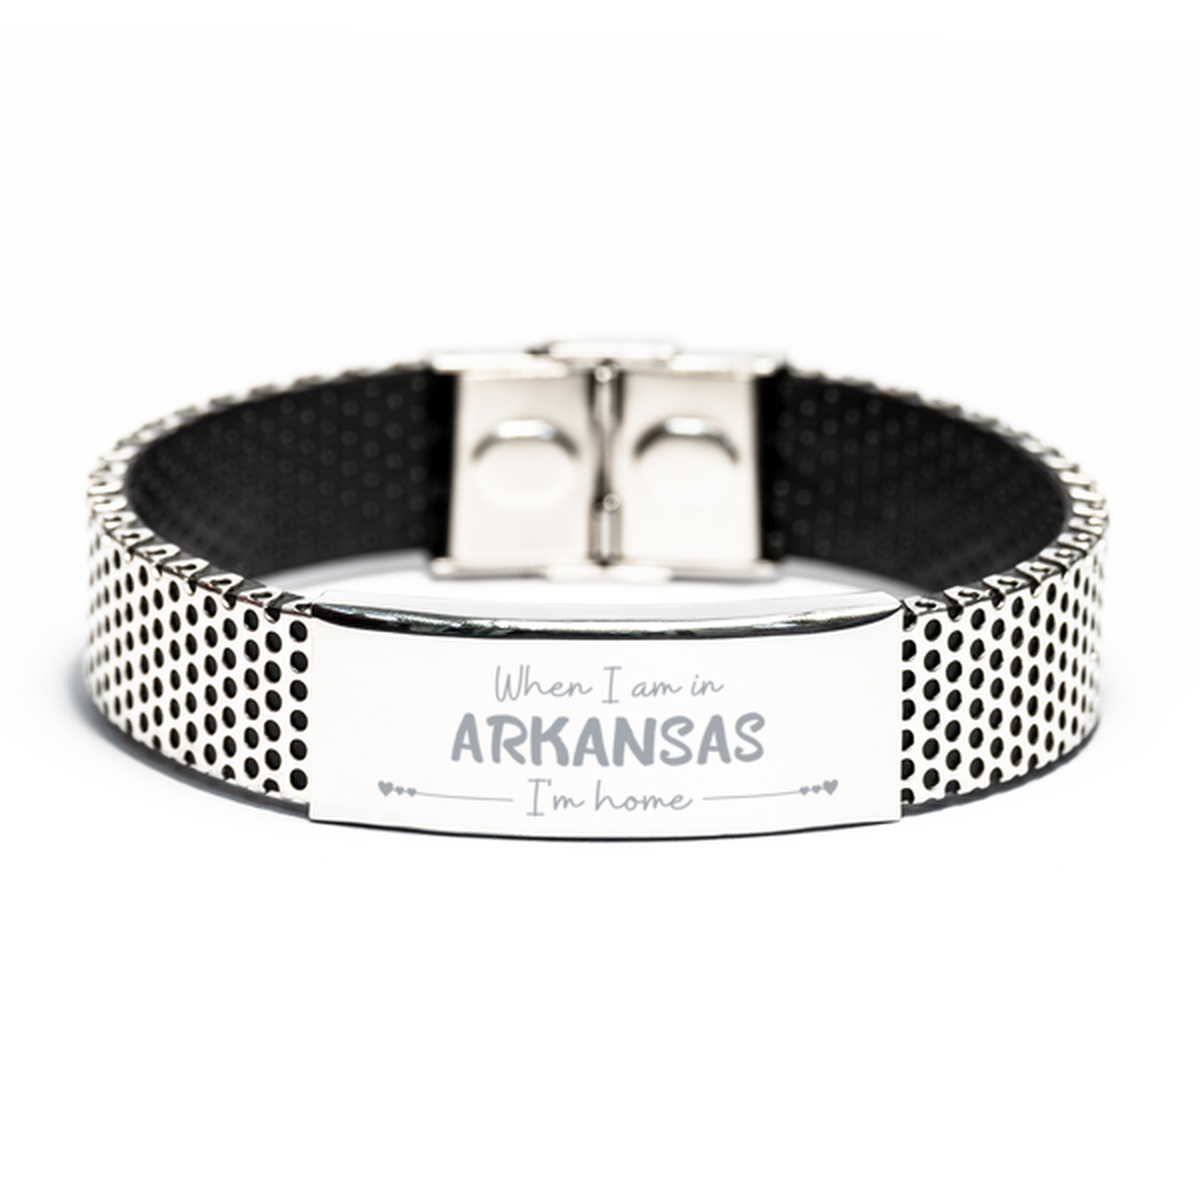 When I am in Arkansas I'm home Stainless Steel Bracelet, Cheap Gifts For Arkansas, State Arkansas Birthday Gifts for Friends Coworker